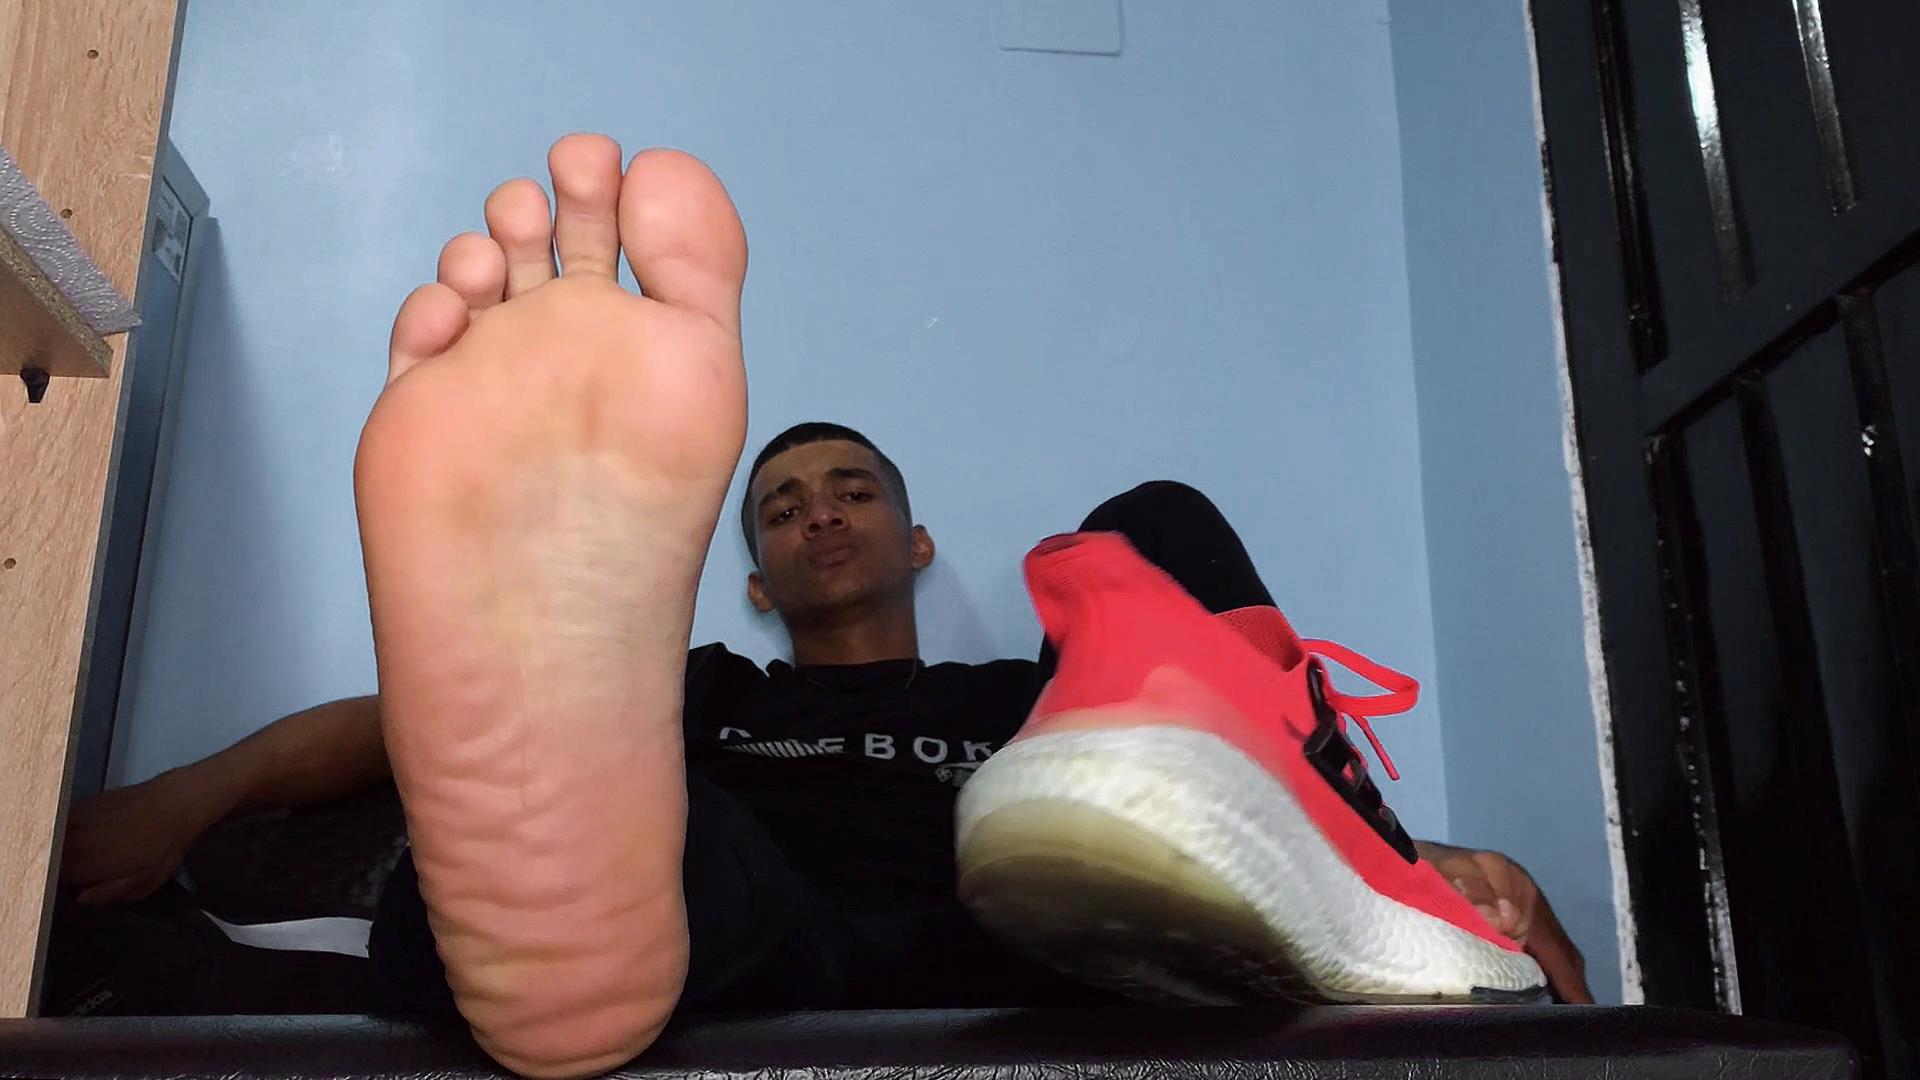 Gay boxer shows his feet for cash